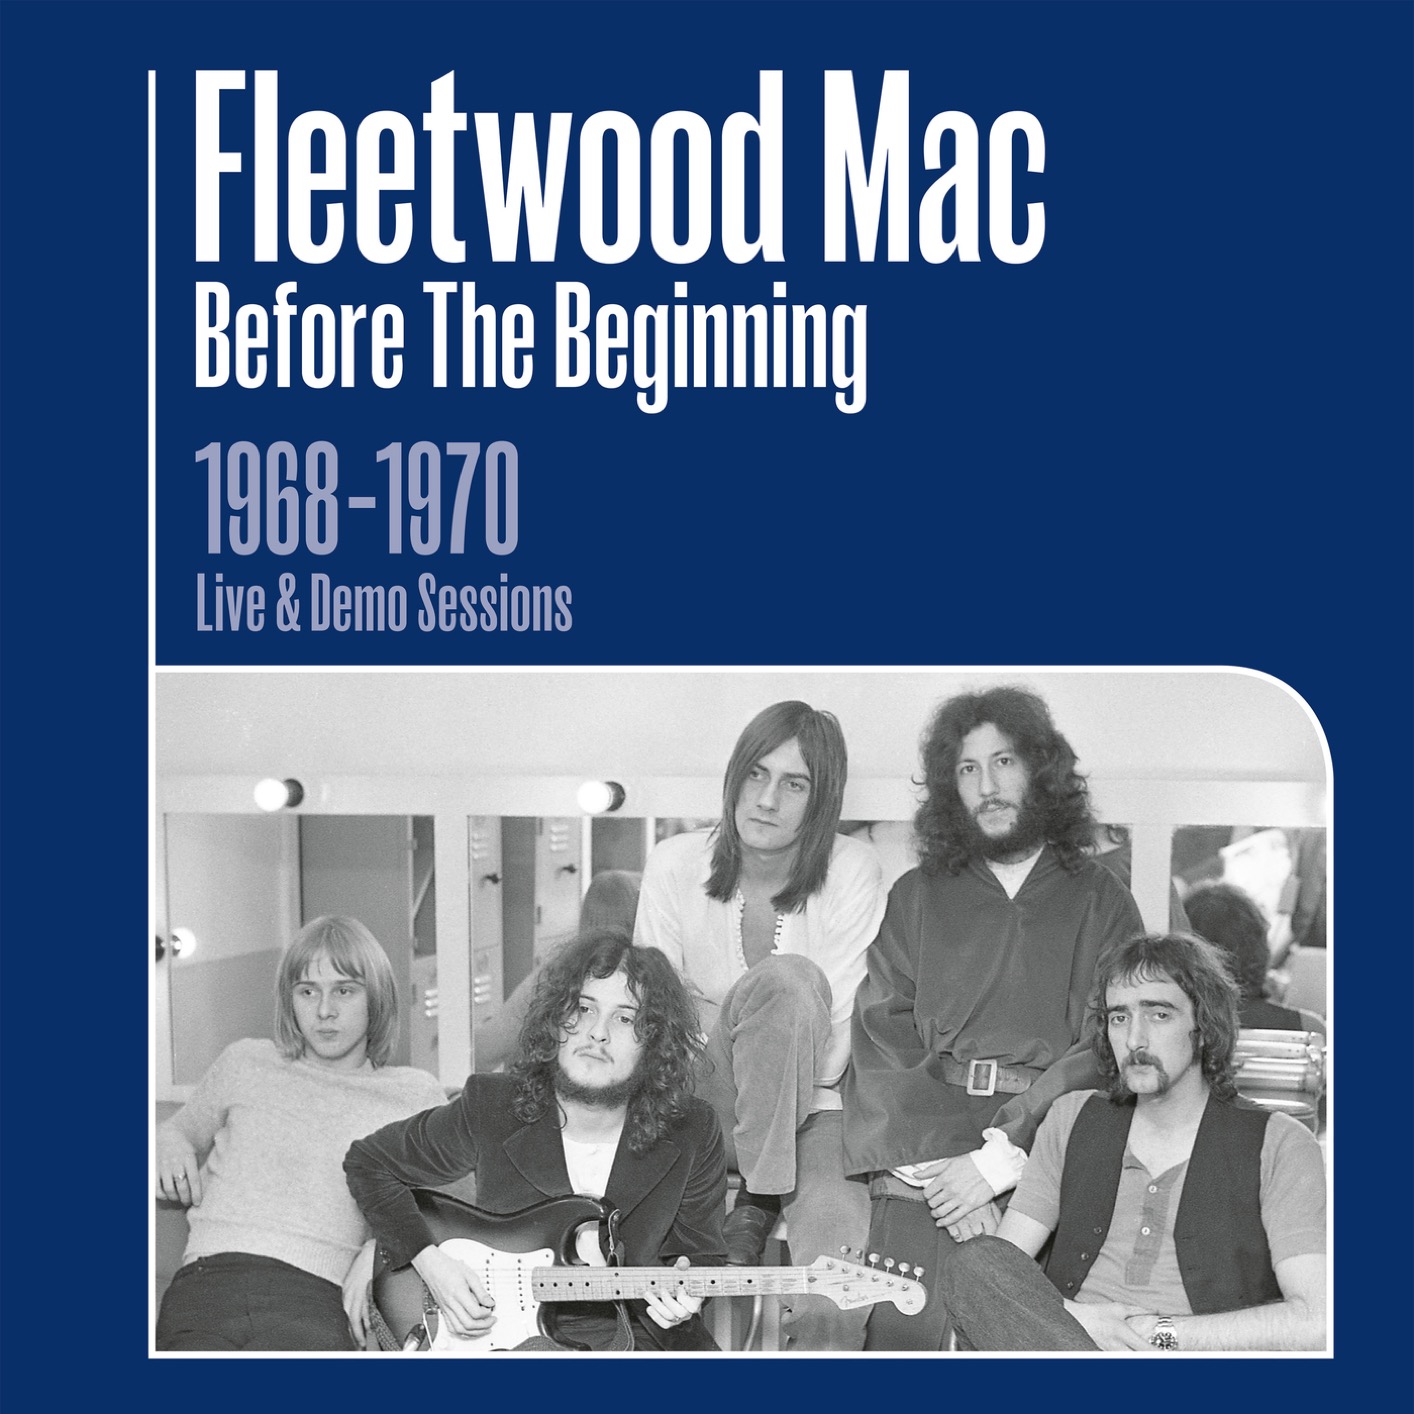 Fleetwood Mac – Before the Beginning: 1968-1970 Rare Live & Demo Sessions (Remastered) (2019) [FLAC 24bit/44,1kHz]